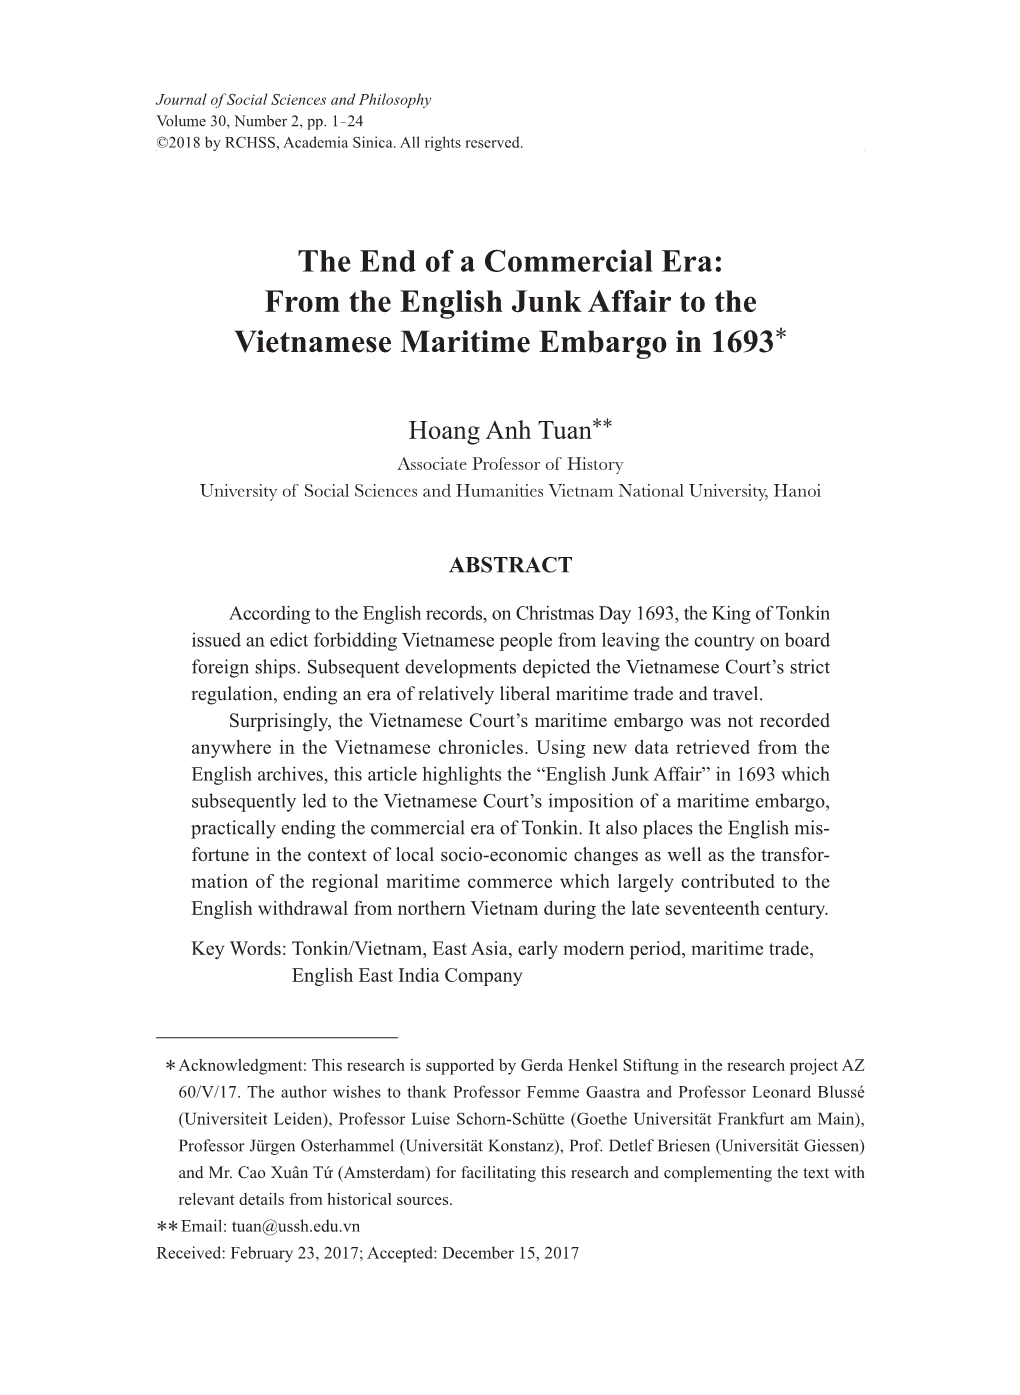 The End of a Commercial Era: from the English Junk Affair to the Vietnamese Maritime Embargo in 1693 1 ©2018 by RCHSS, Academia Sinica